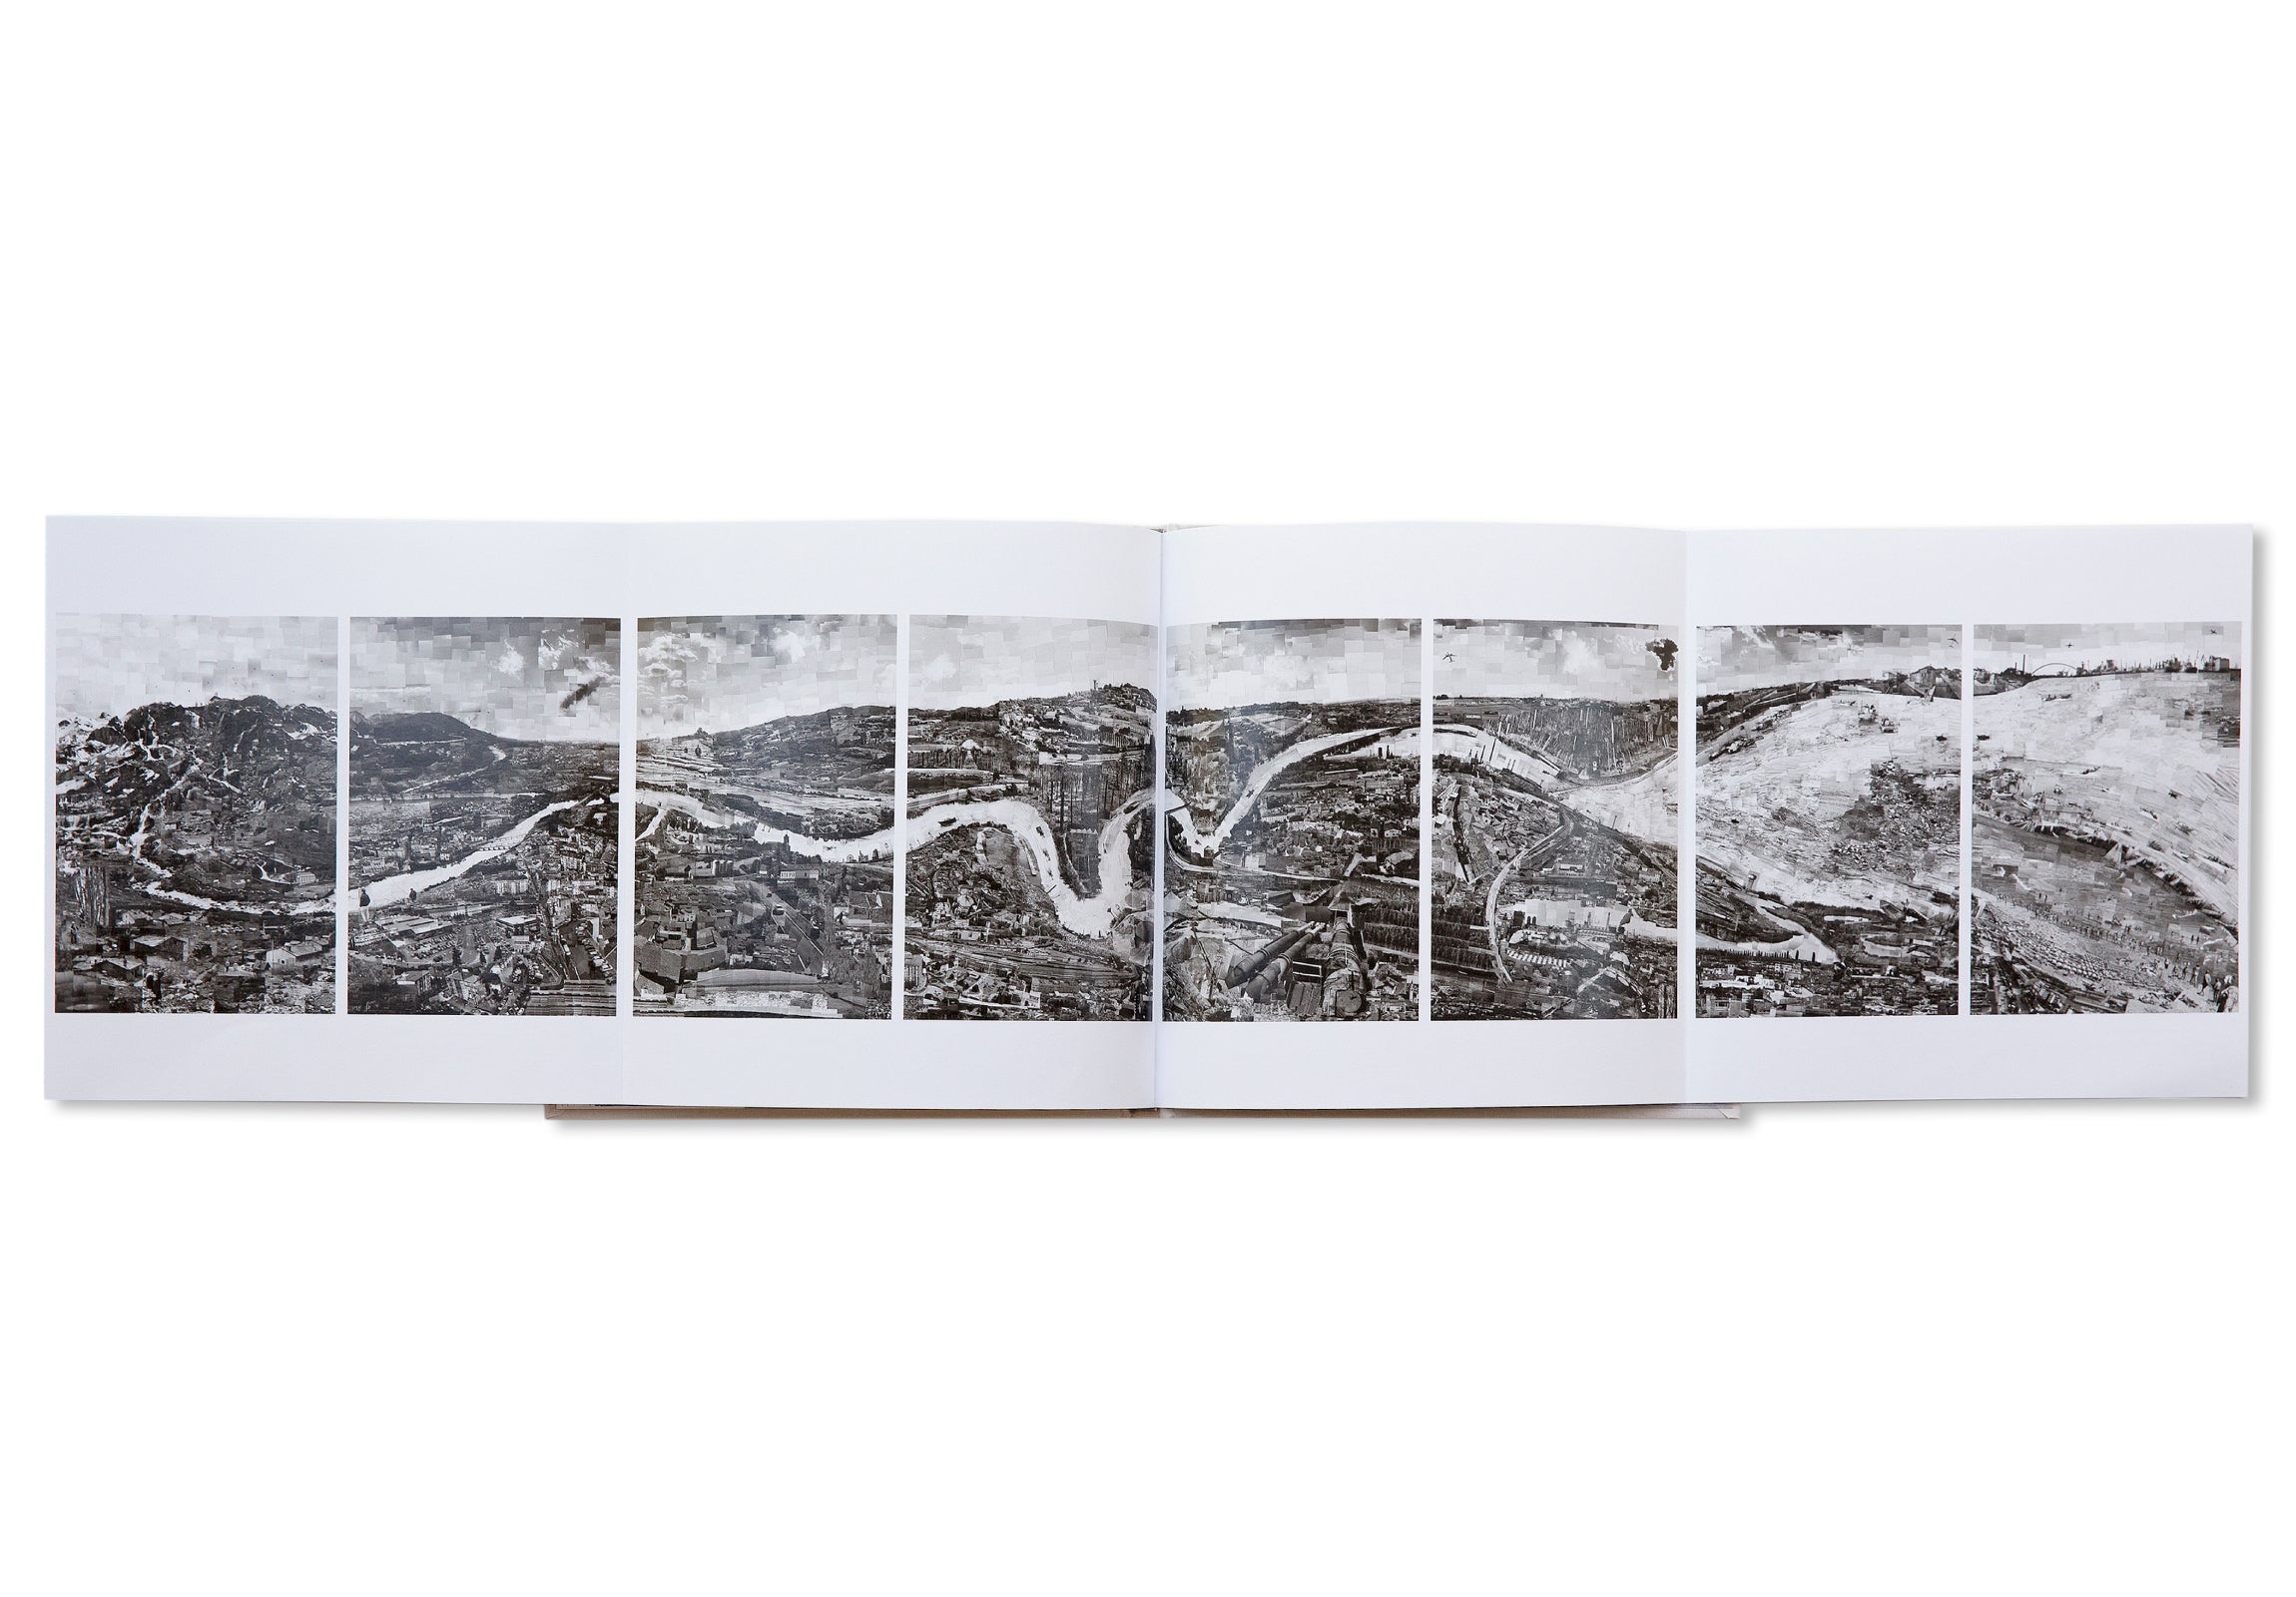 WATER LINE. A STORY OF THE PO RIVER by Sohei Nishino [SIGNED]